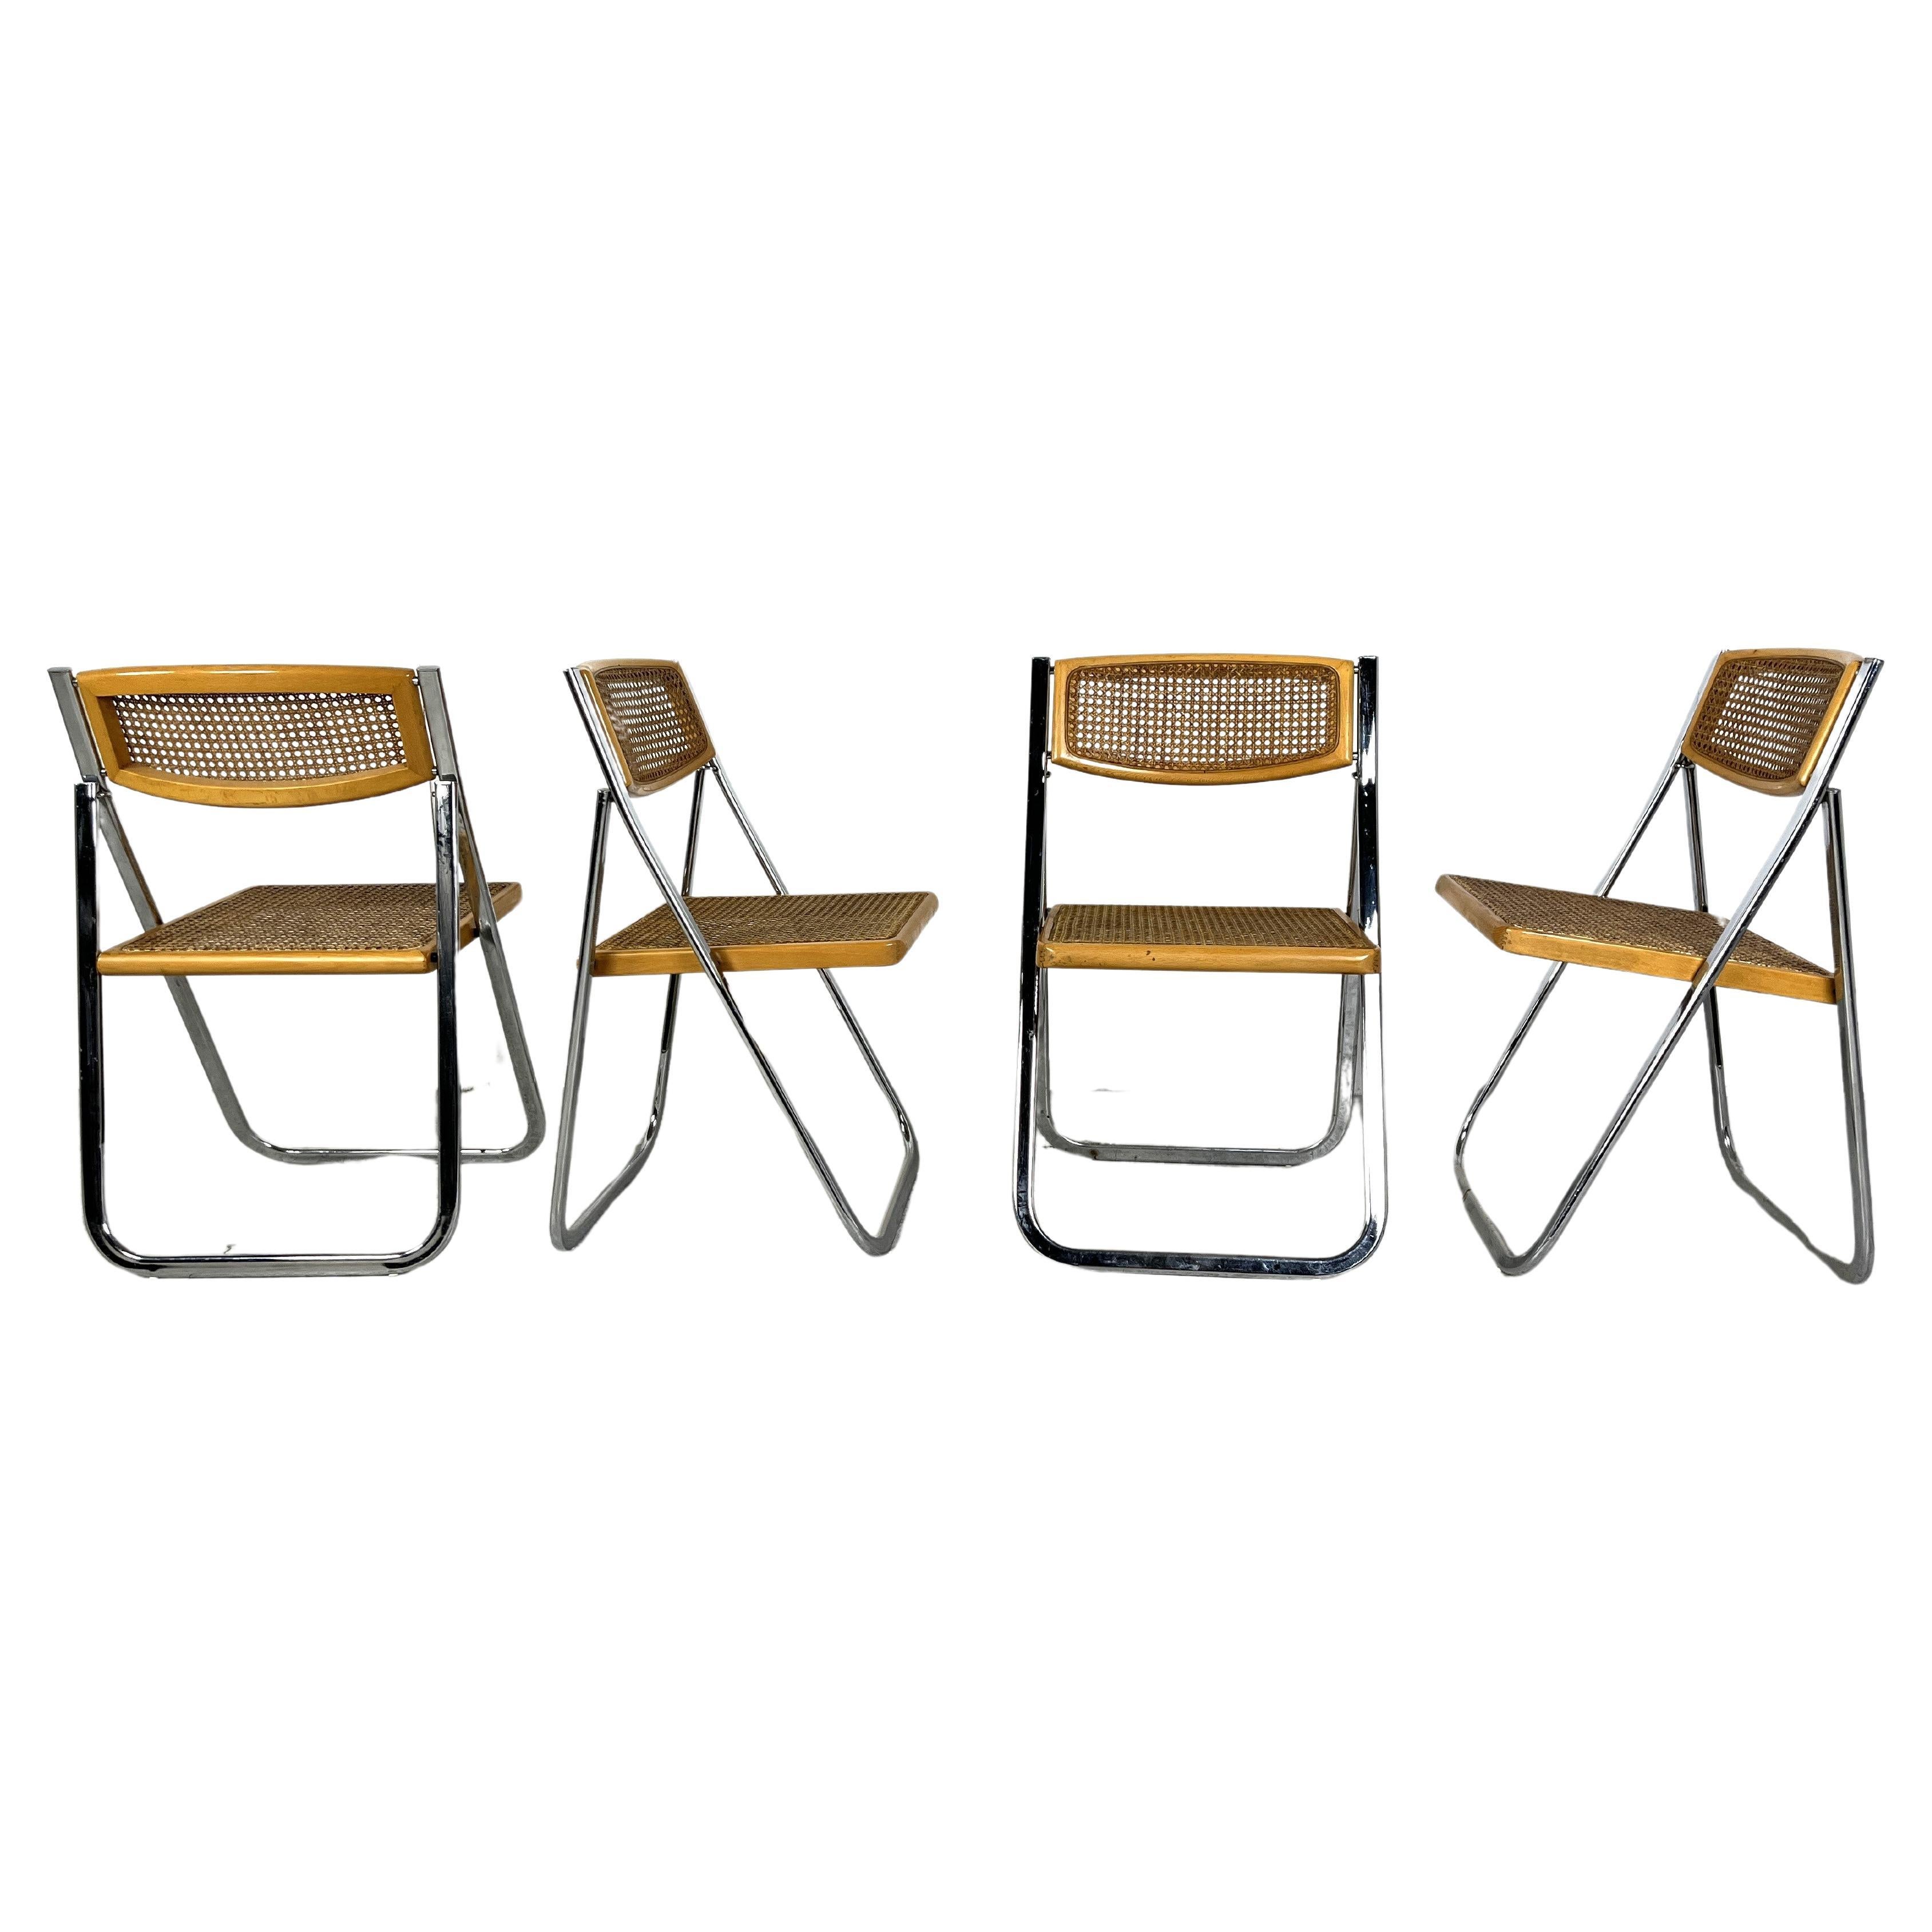 Vintage rattan folding chairs, 1970s - set of 4 For Sale